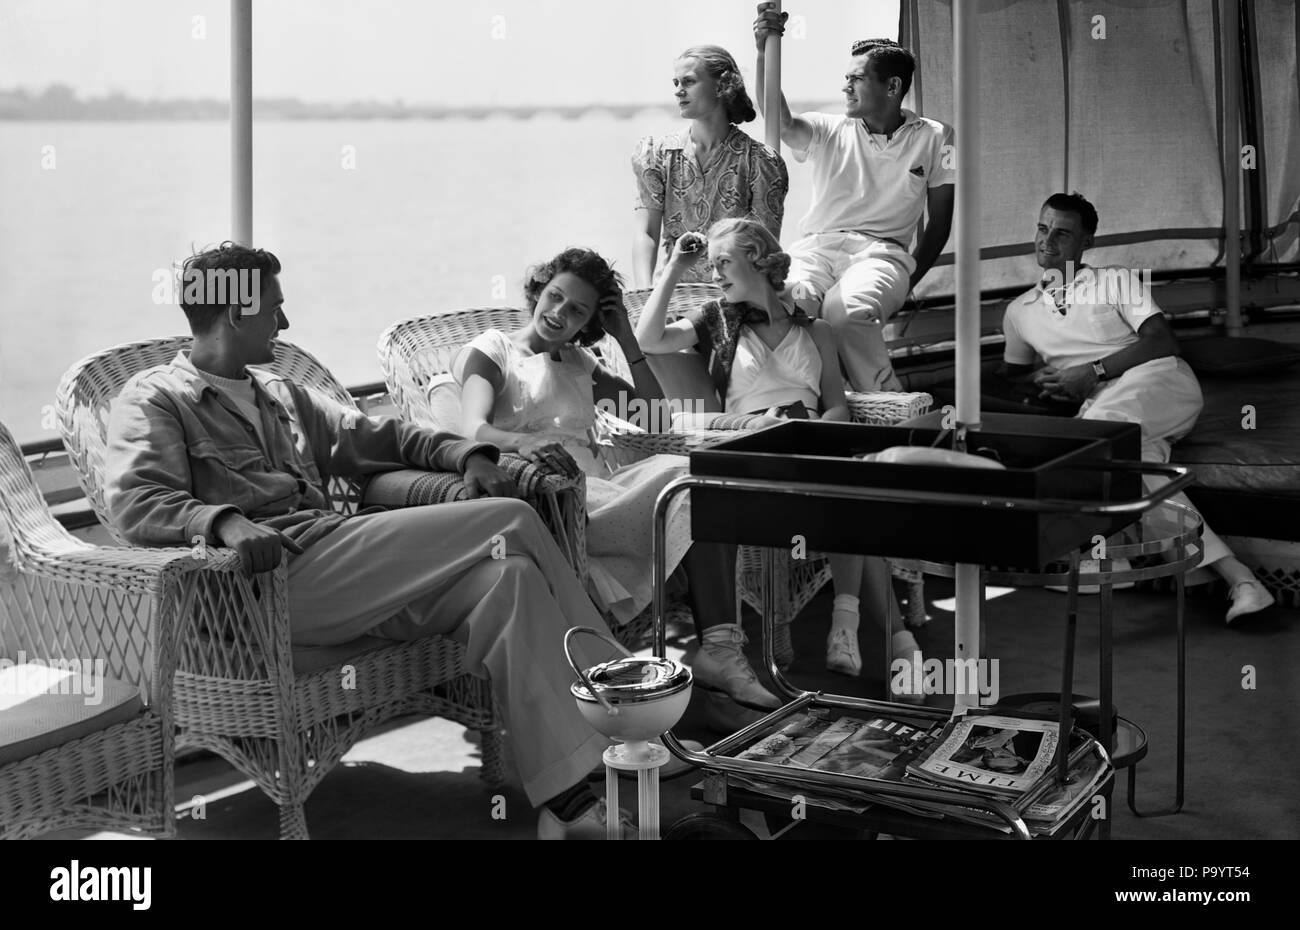 1930s GROUP MEN WOMEN ONBOARD YACHT RELAXING ON SHADED DECK - bx005638 CAM001 HARS COPY SPACE FRIENDSHIP HALF-LENGTH LADIES PERSONS WICKER MALES SHADE B&W TIME OFF DREAMS HAPPINESS LEISURE GETAWAY SOCIETY WEALTH CAM001 HOLIDAYS TRAVELING UPSCALE ESCAPE STYLISH SHADED MID-ADULT RELAXATION TOGETHERNESS VACATIONS WIVES BLACK AND WHITE CAUCASIAN ETHNICITY COMPANIONS FIRST CLASS OLD FASHIONED Stock Photo